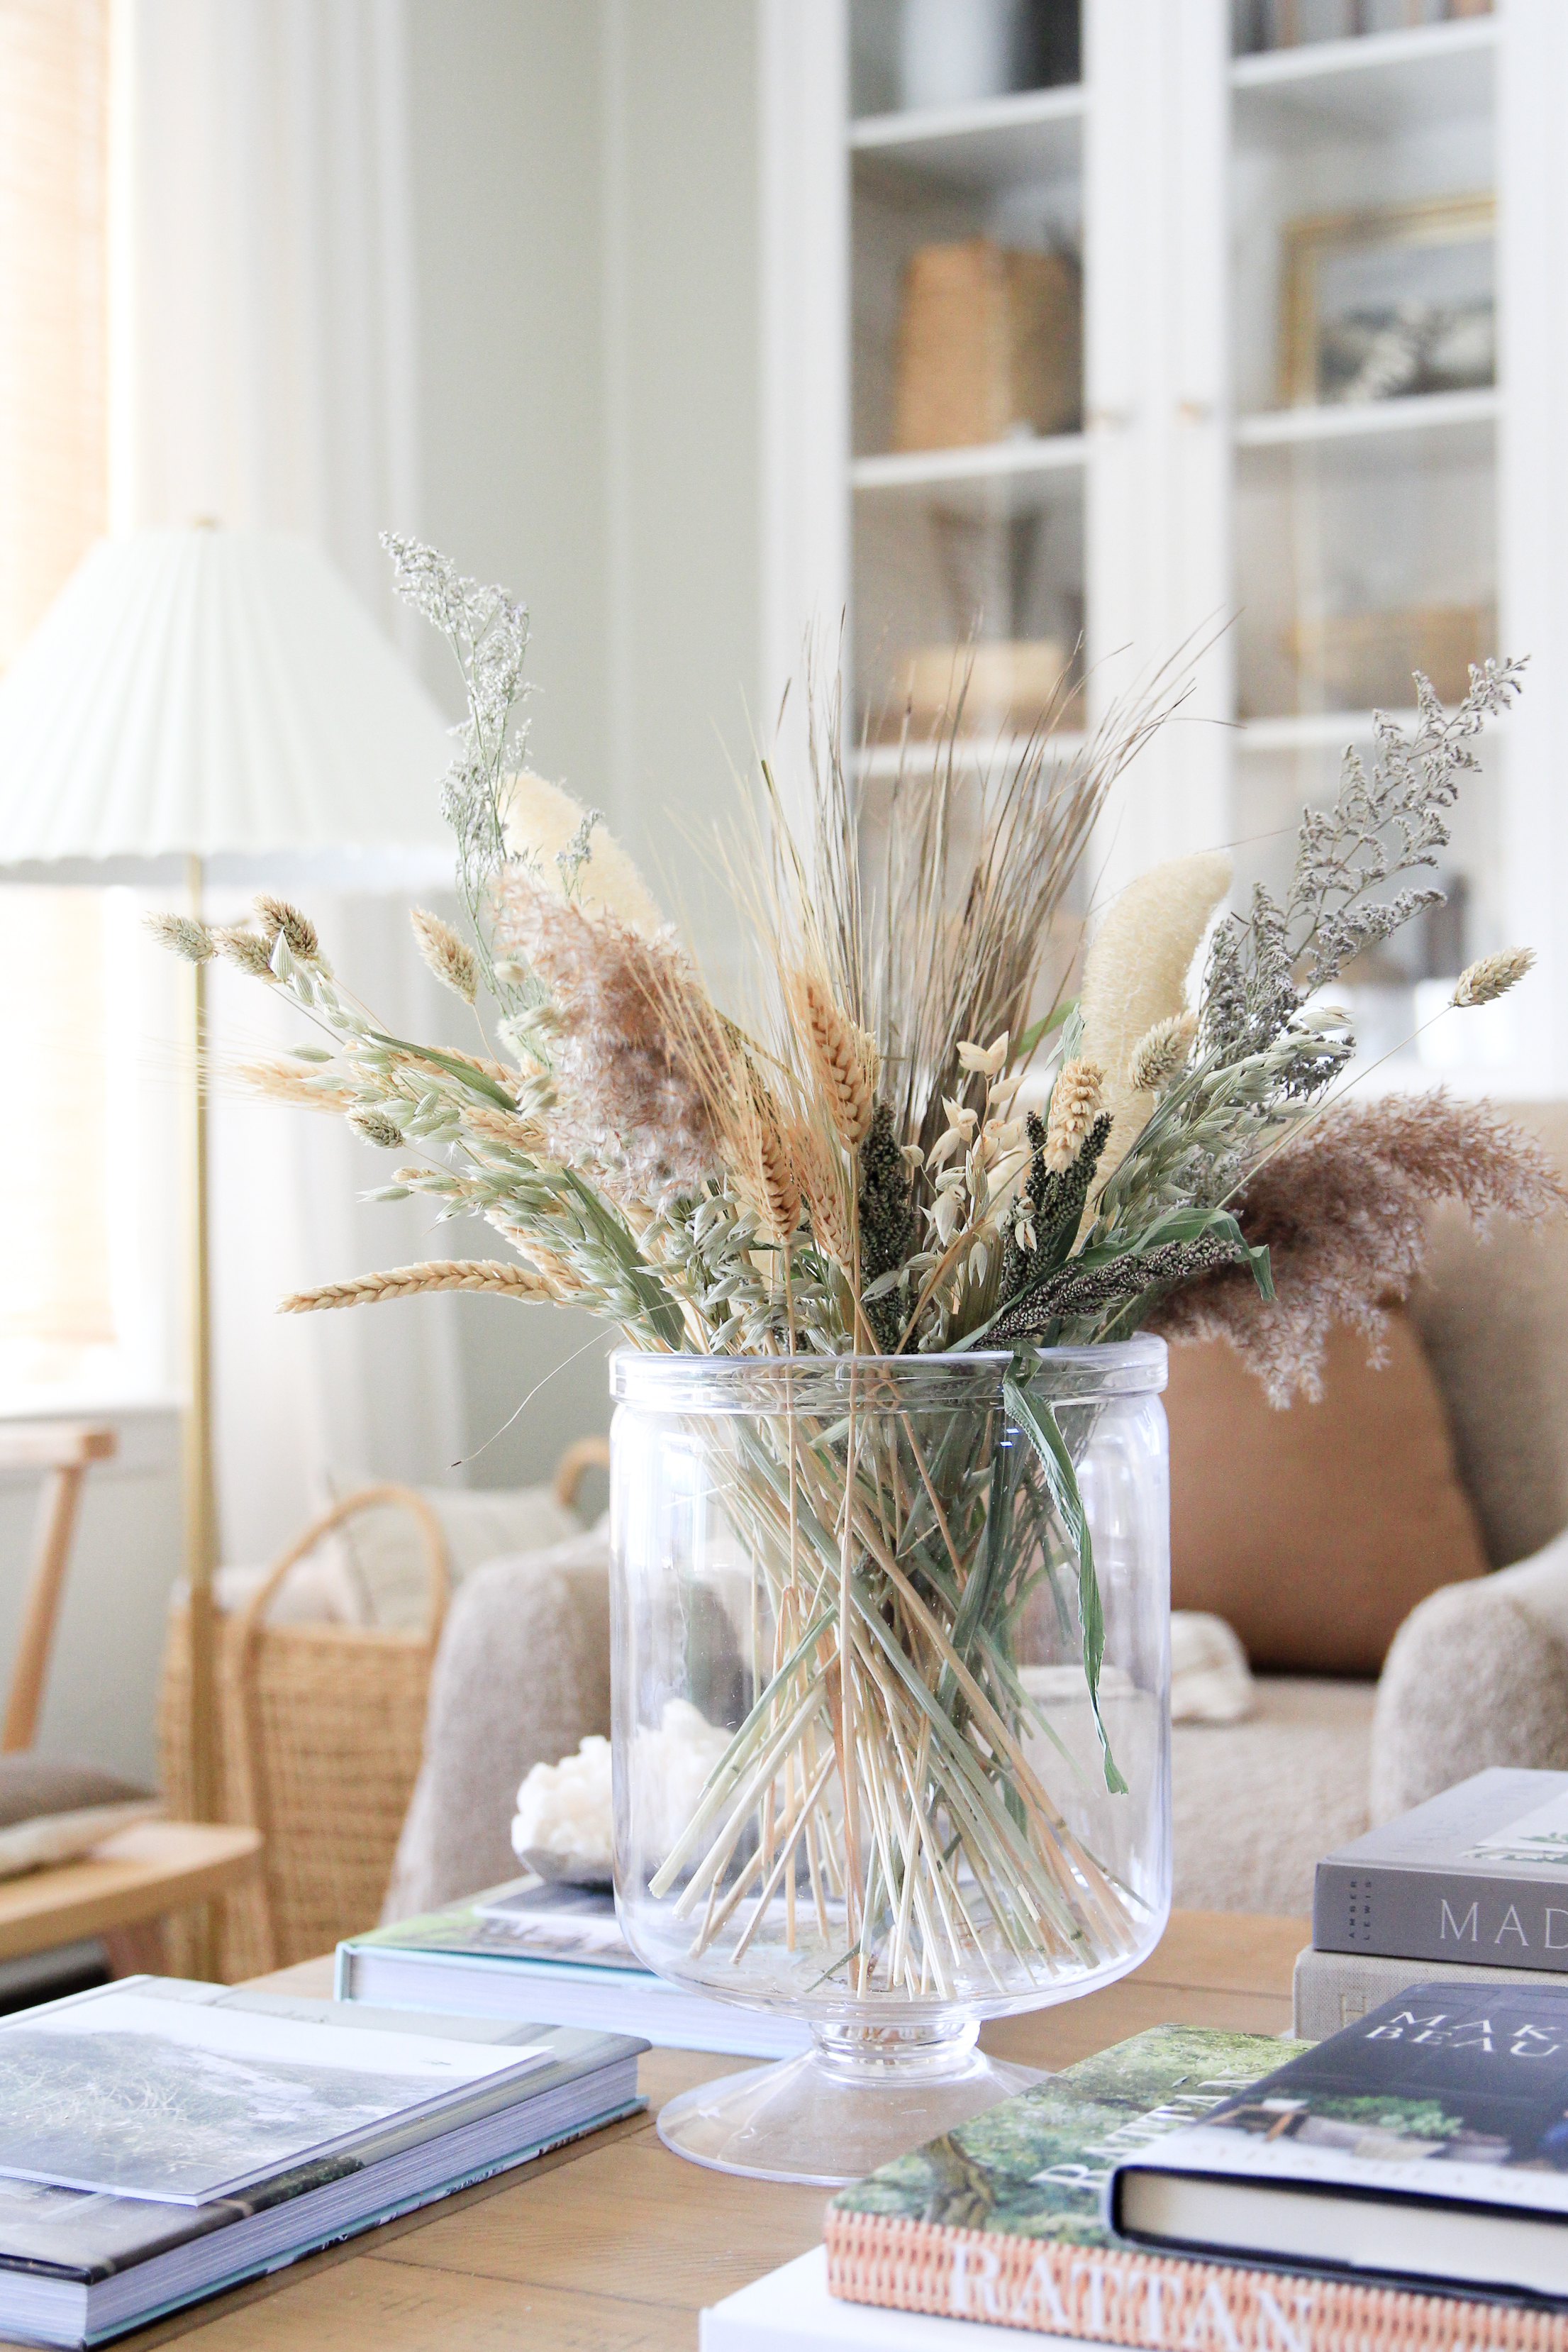 Living Room Coffee Table Decor featuring a Late Summer-Early Fall Floral Arrangement Using Dried Florals and Grasses